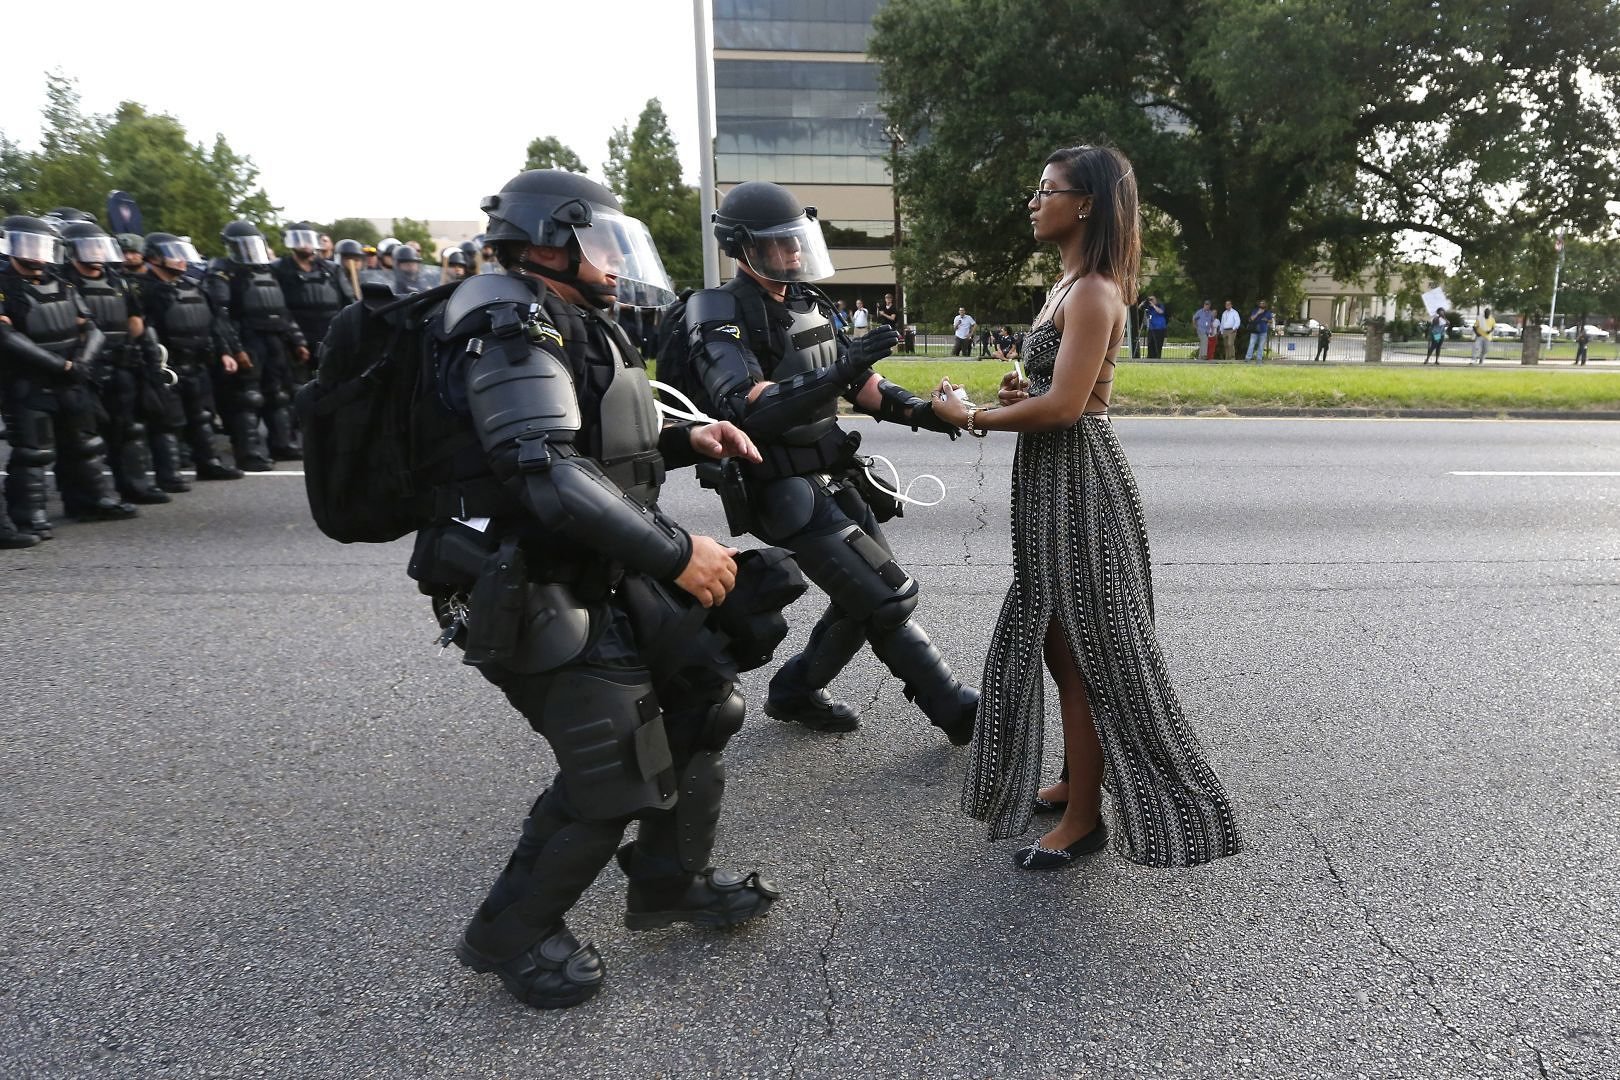 Contemporary issuesâ singles, first prize Leshia Evans stands her ground while offering her hands for arrest during a protest against police brutality in Louisiana, US Photograph: Jonathan Bachman/Reuters